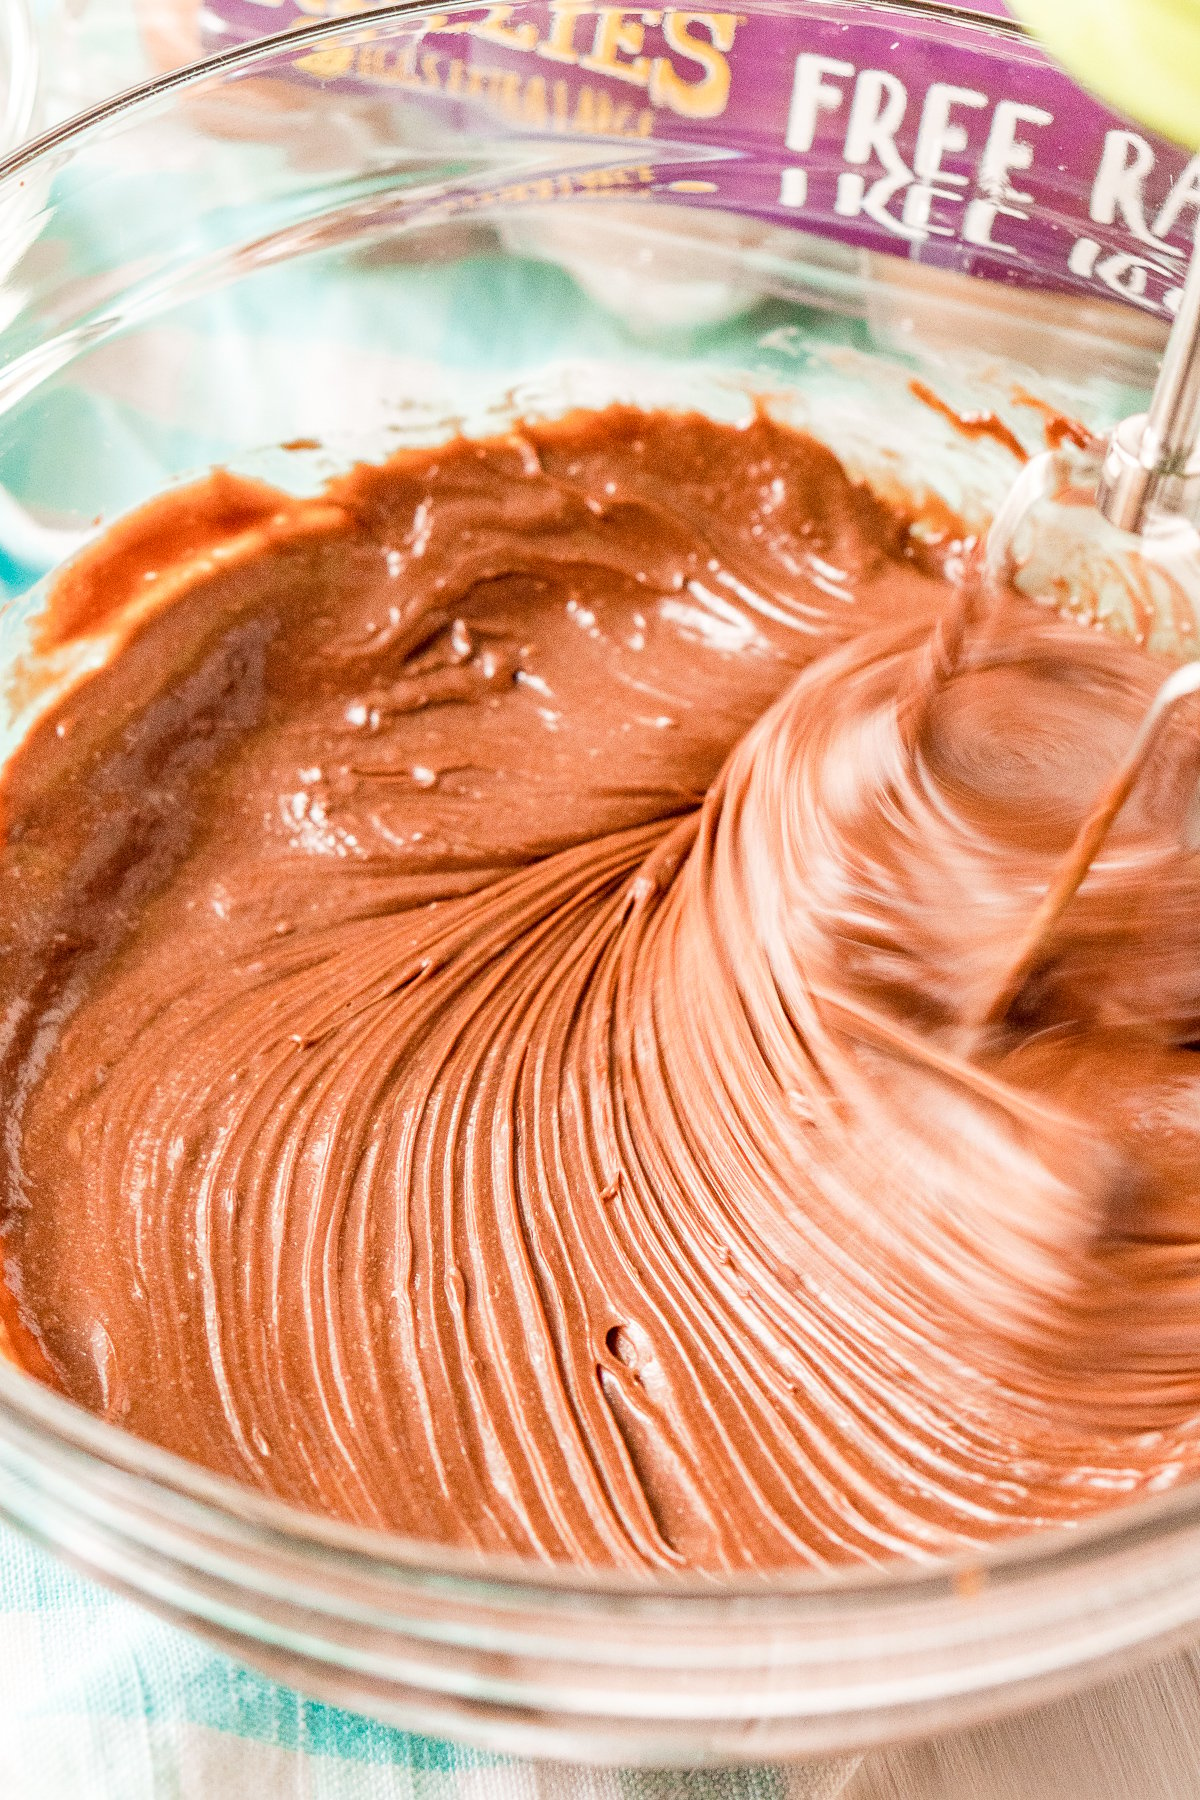 Hand-mixer beating hazelnut spread and eggs together in a large glass bowl.